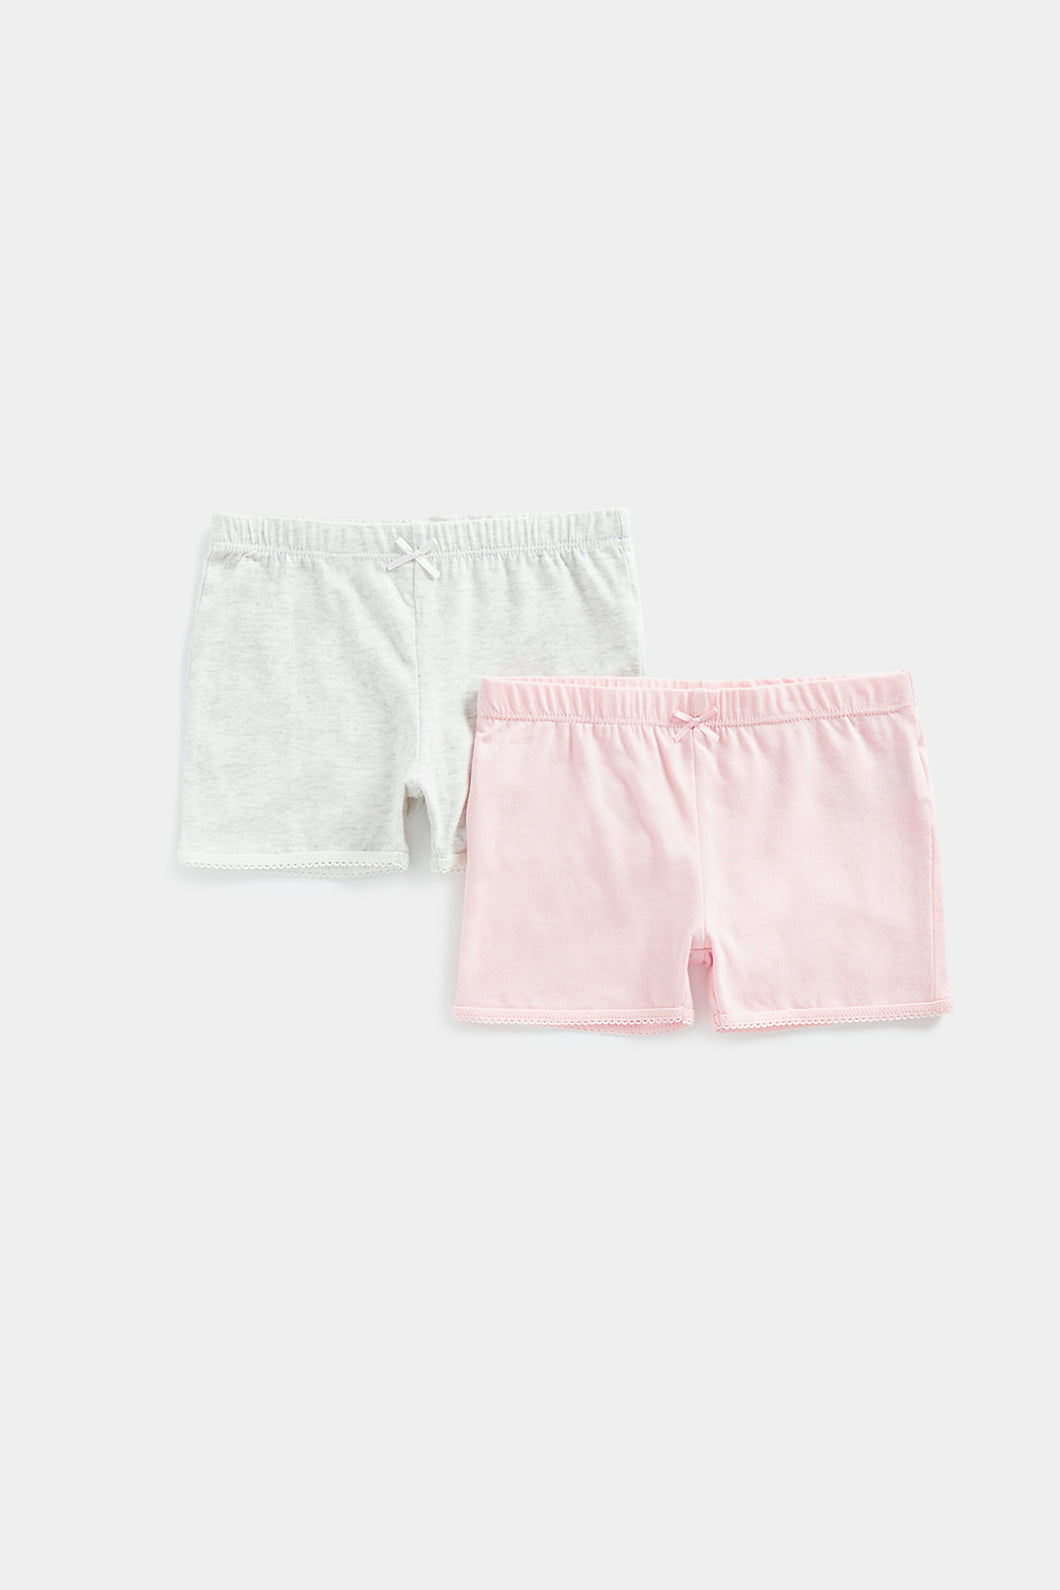 Mothercare Modesty Shorts - 2 Pack